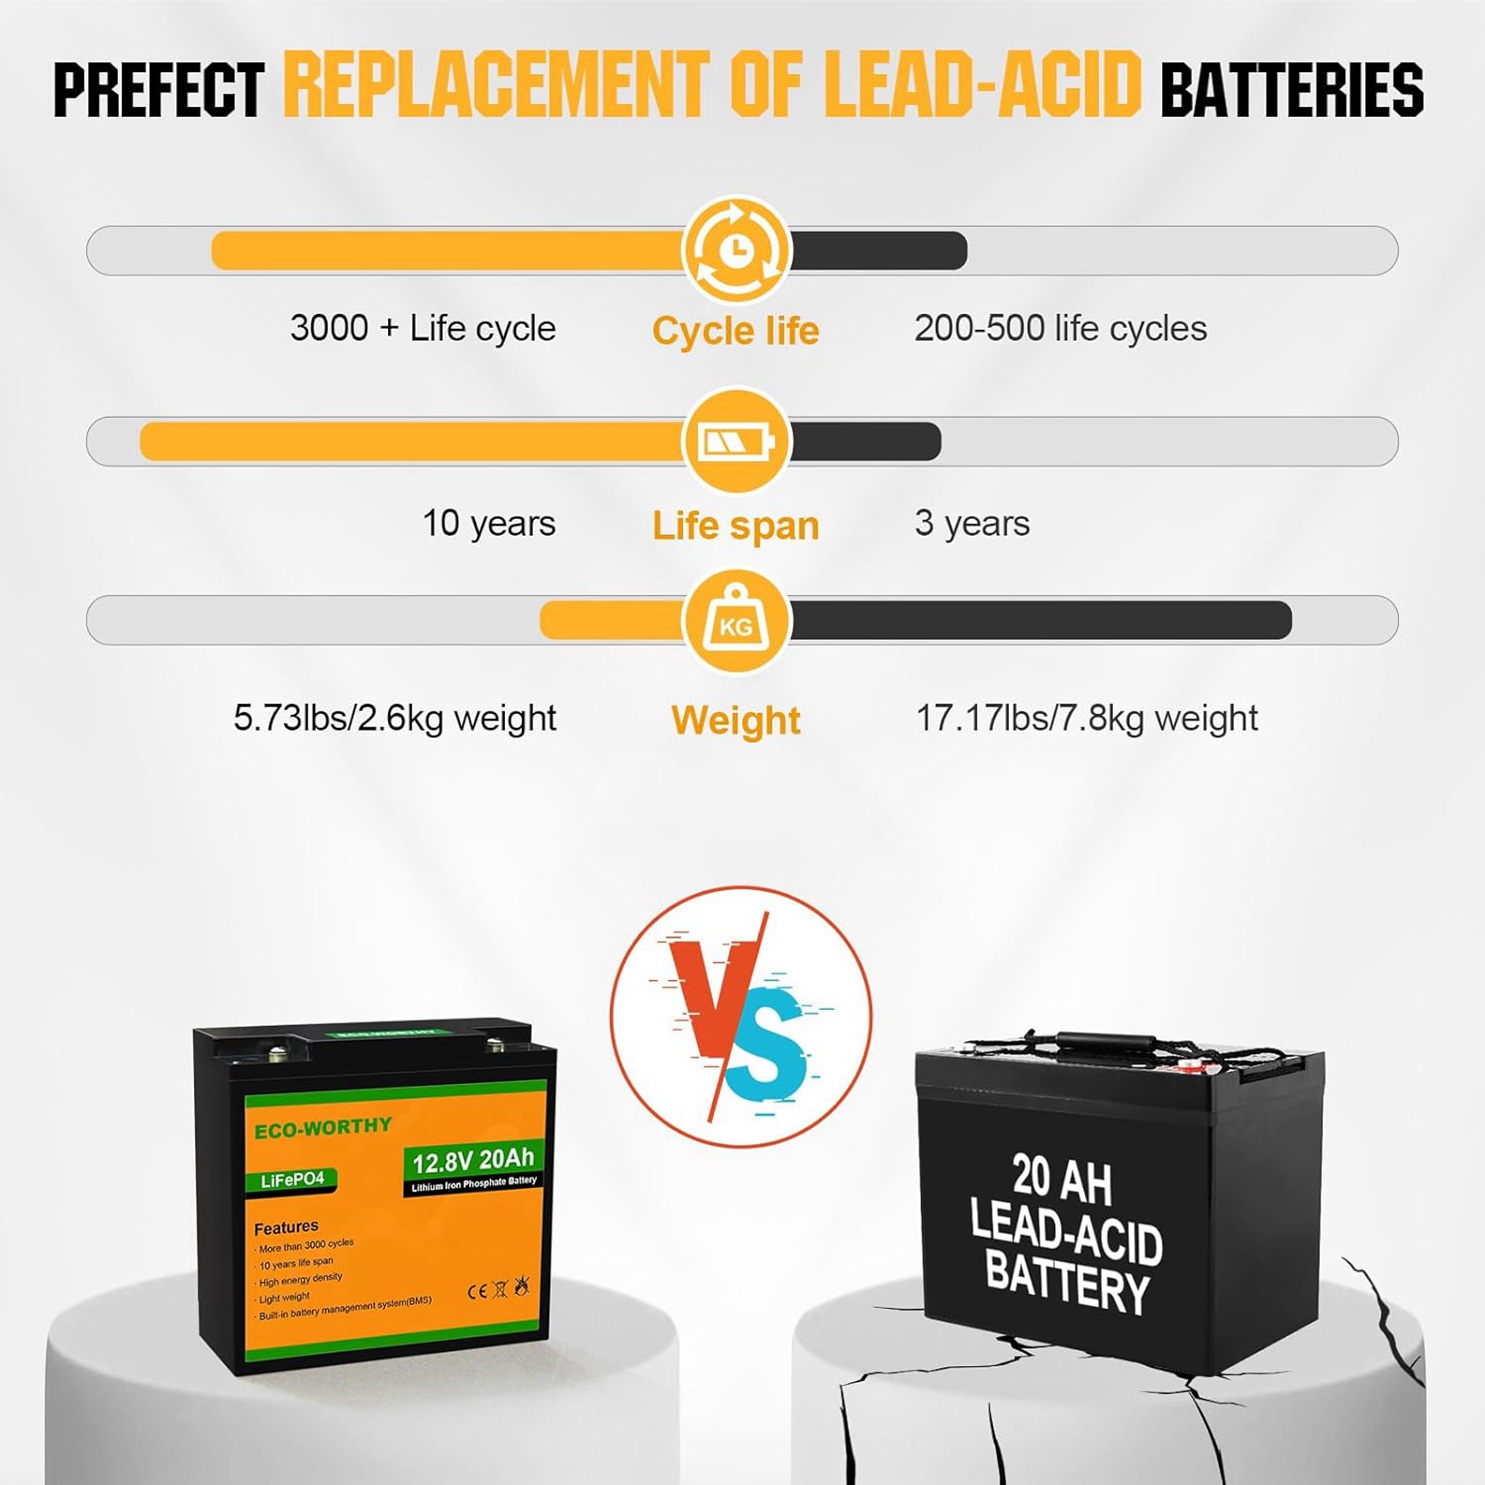 The energy revolution of lithium batteries replacing lead-acid batteries